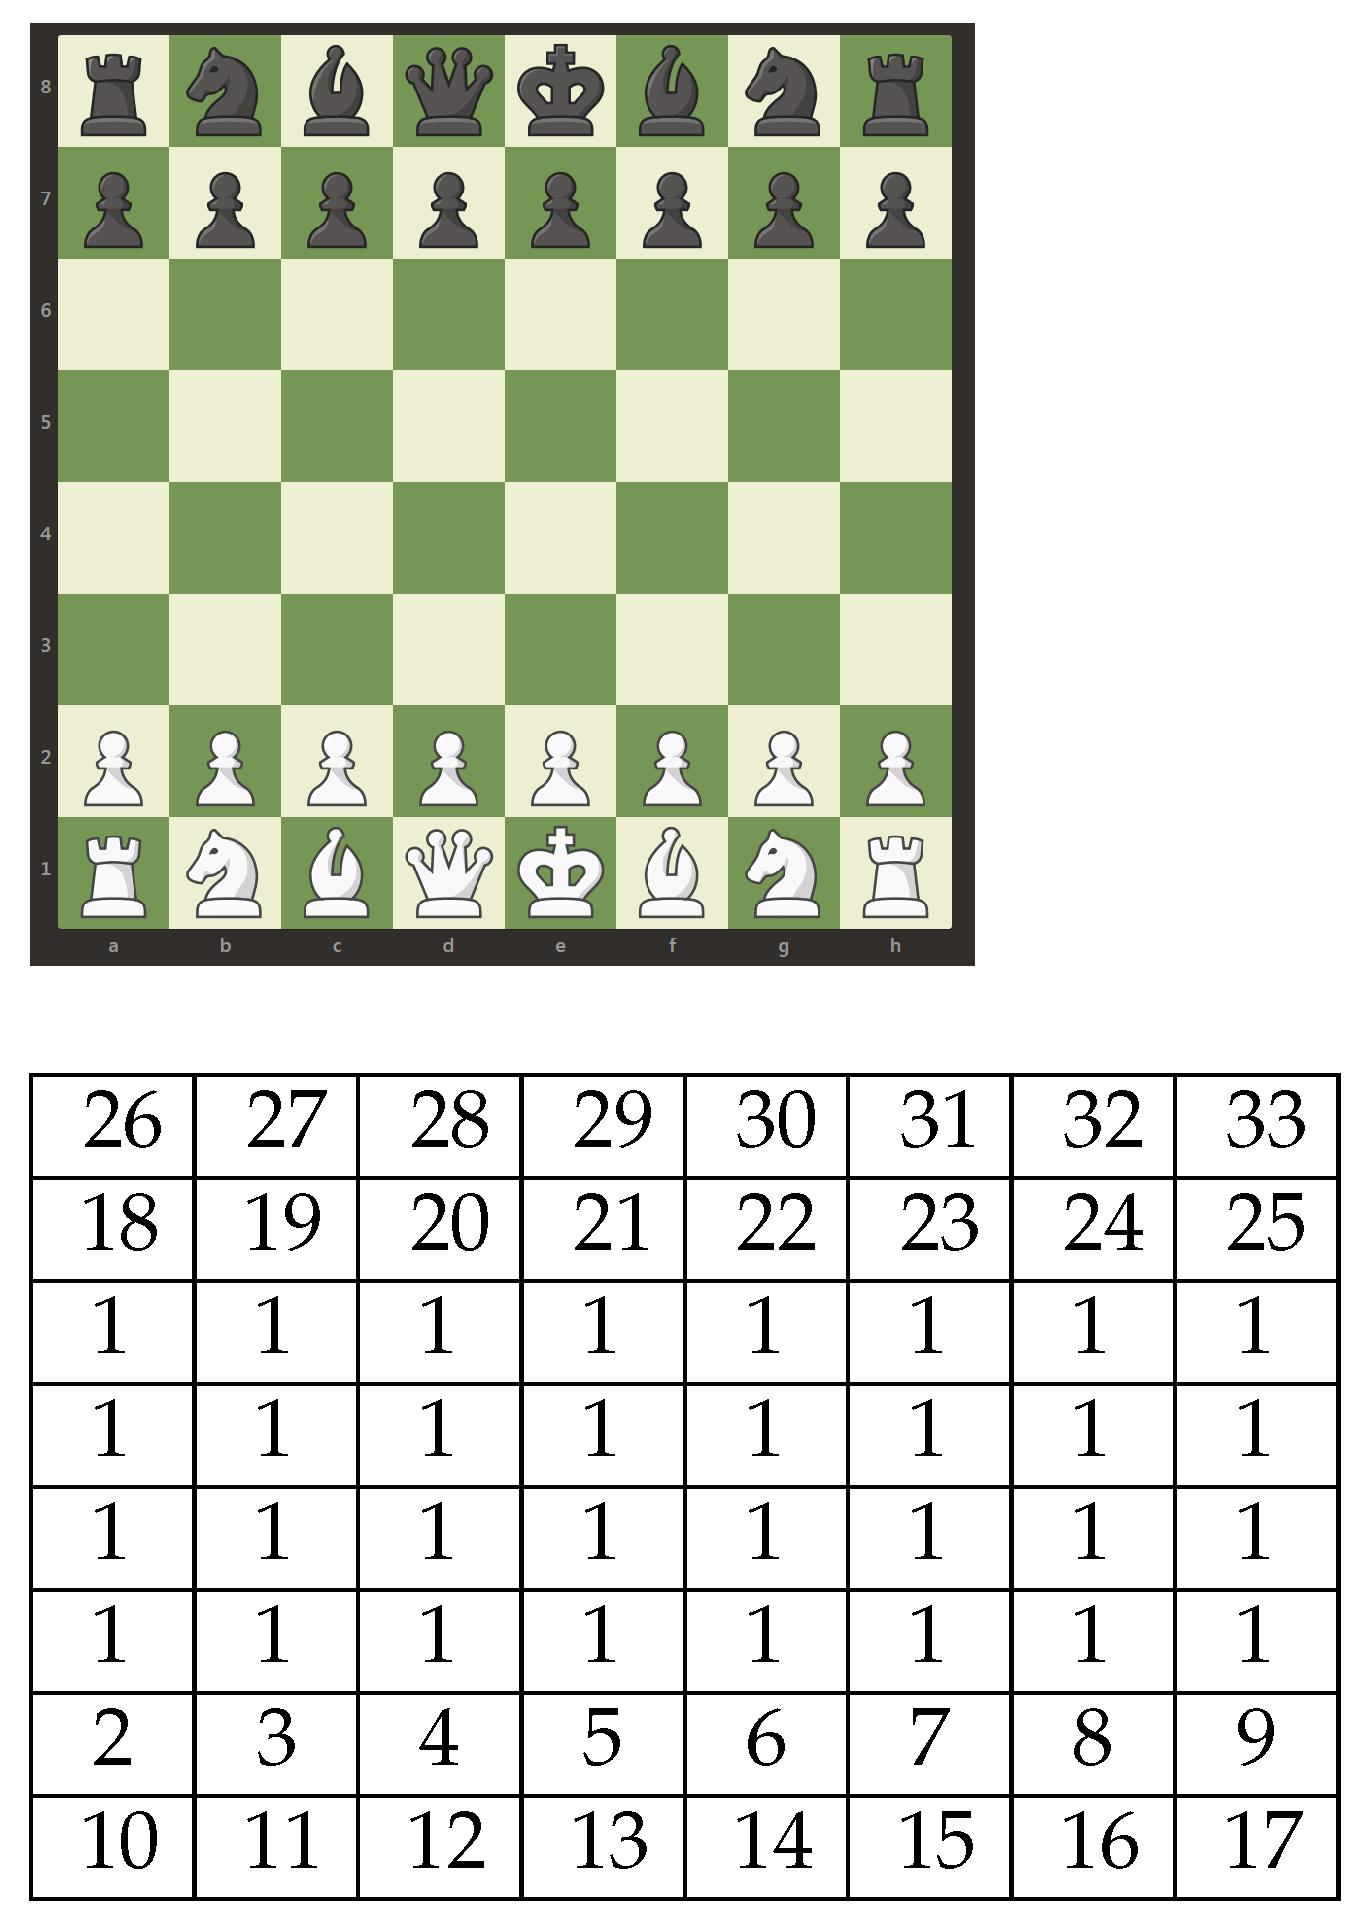 New analysis format in beta - Chess Forums 